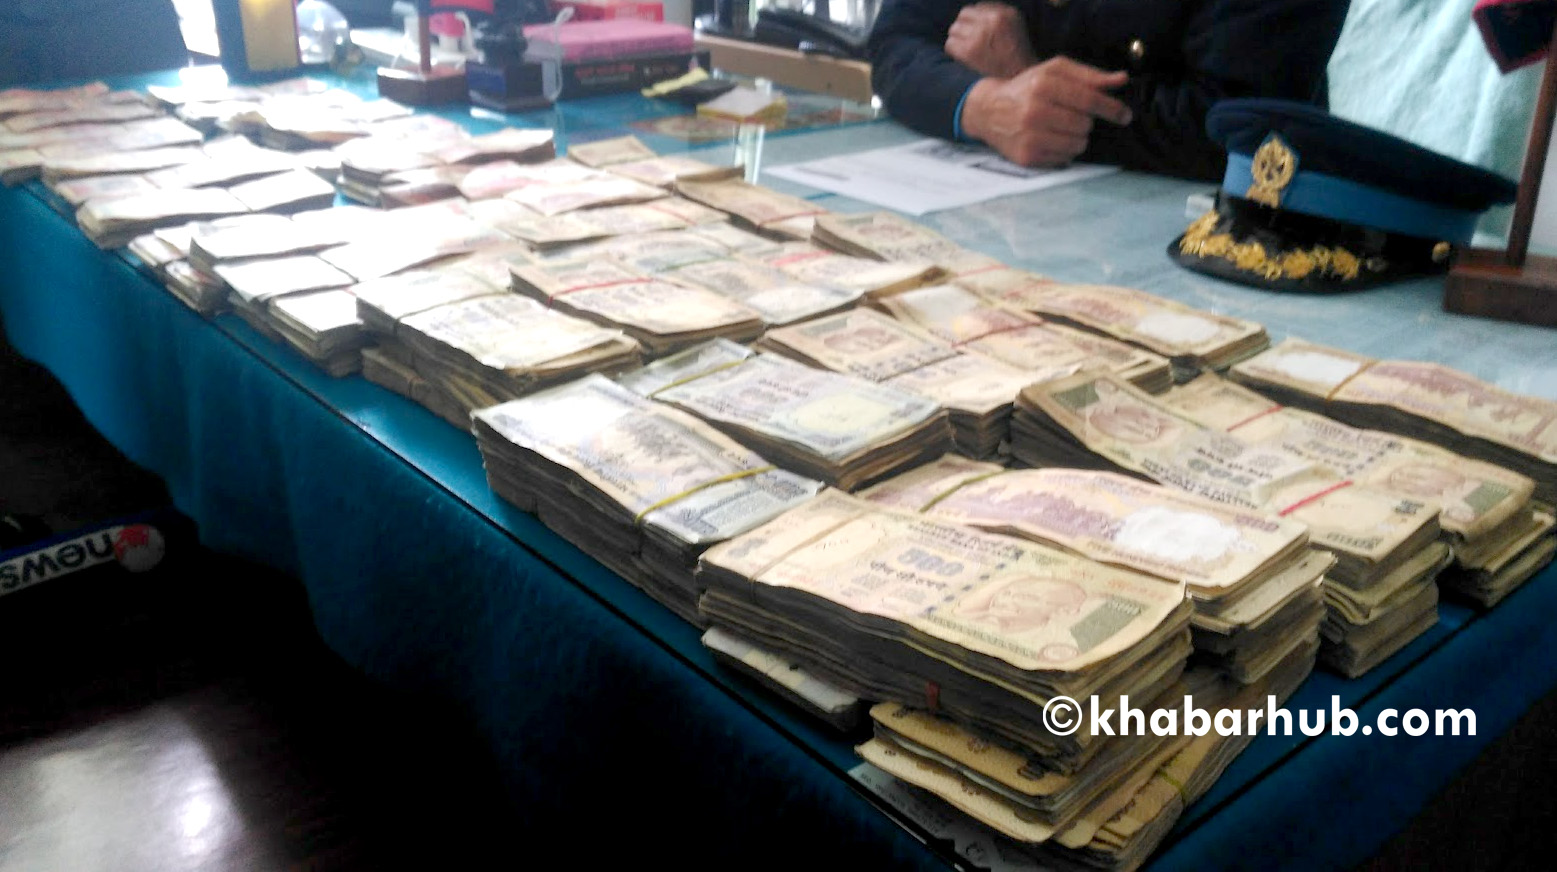 One nabbed with 400,000 Indian rupees